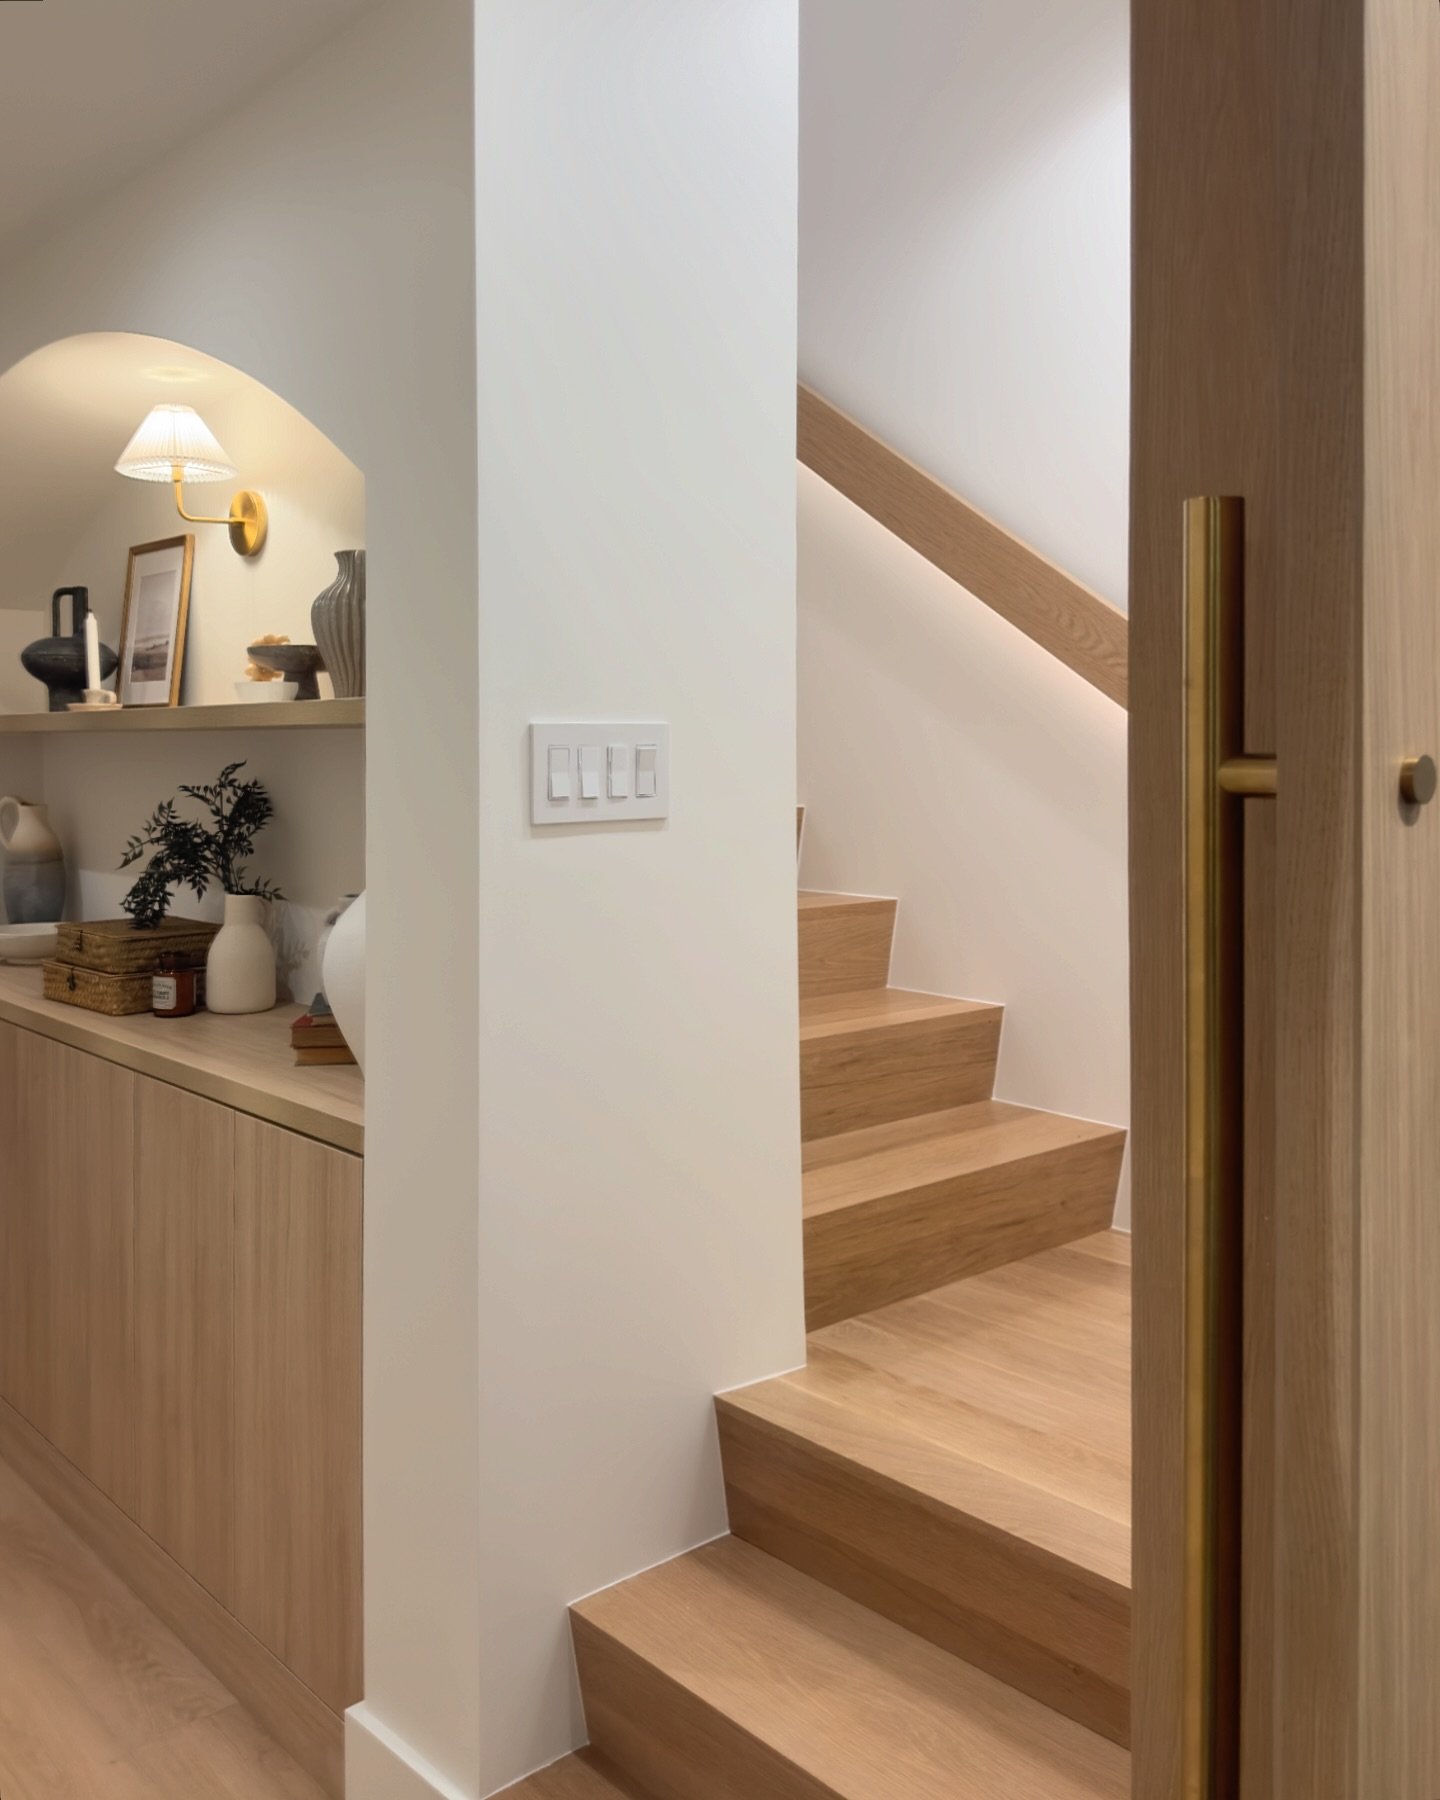 If you could redesign any room in your home right now, which would it be? 

#interiorstying #homeinsporation #modernstairs #homedecorating #neutraldecor #homedecorideas #interiordecorating #edesigner #oakvillehomes #oakvilleinteriordecorator